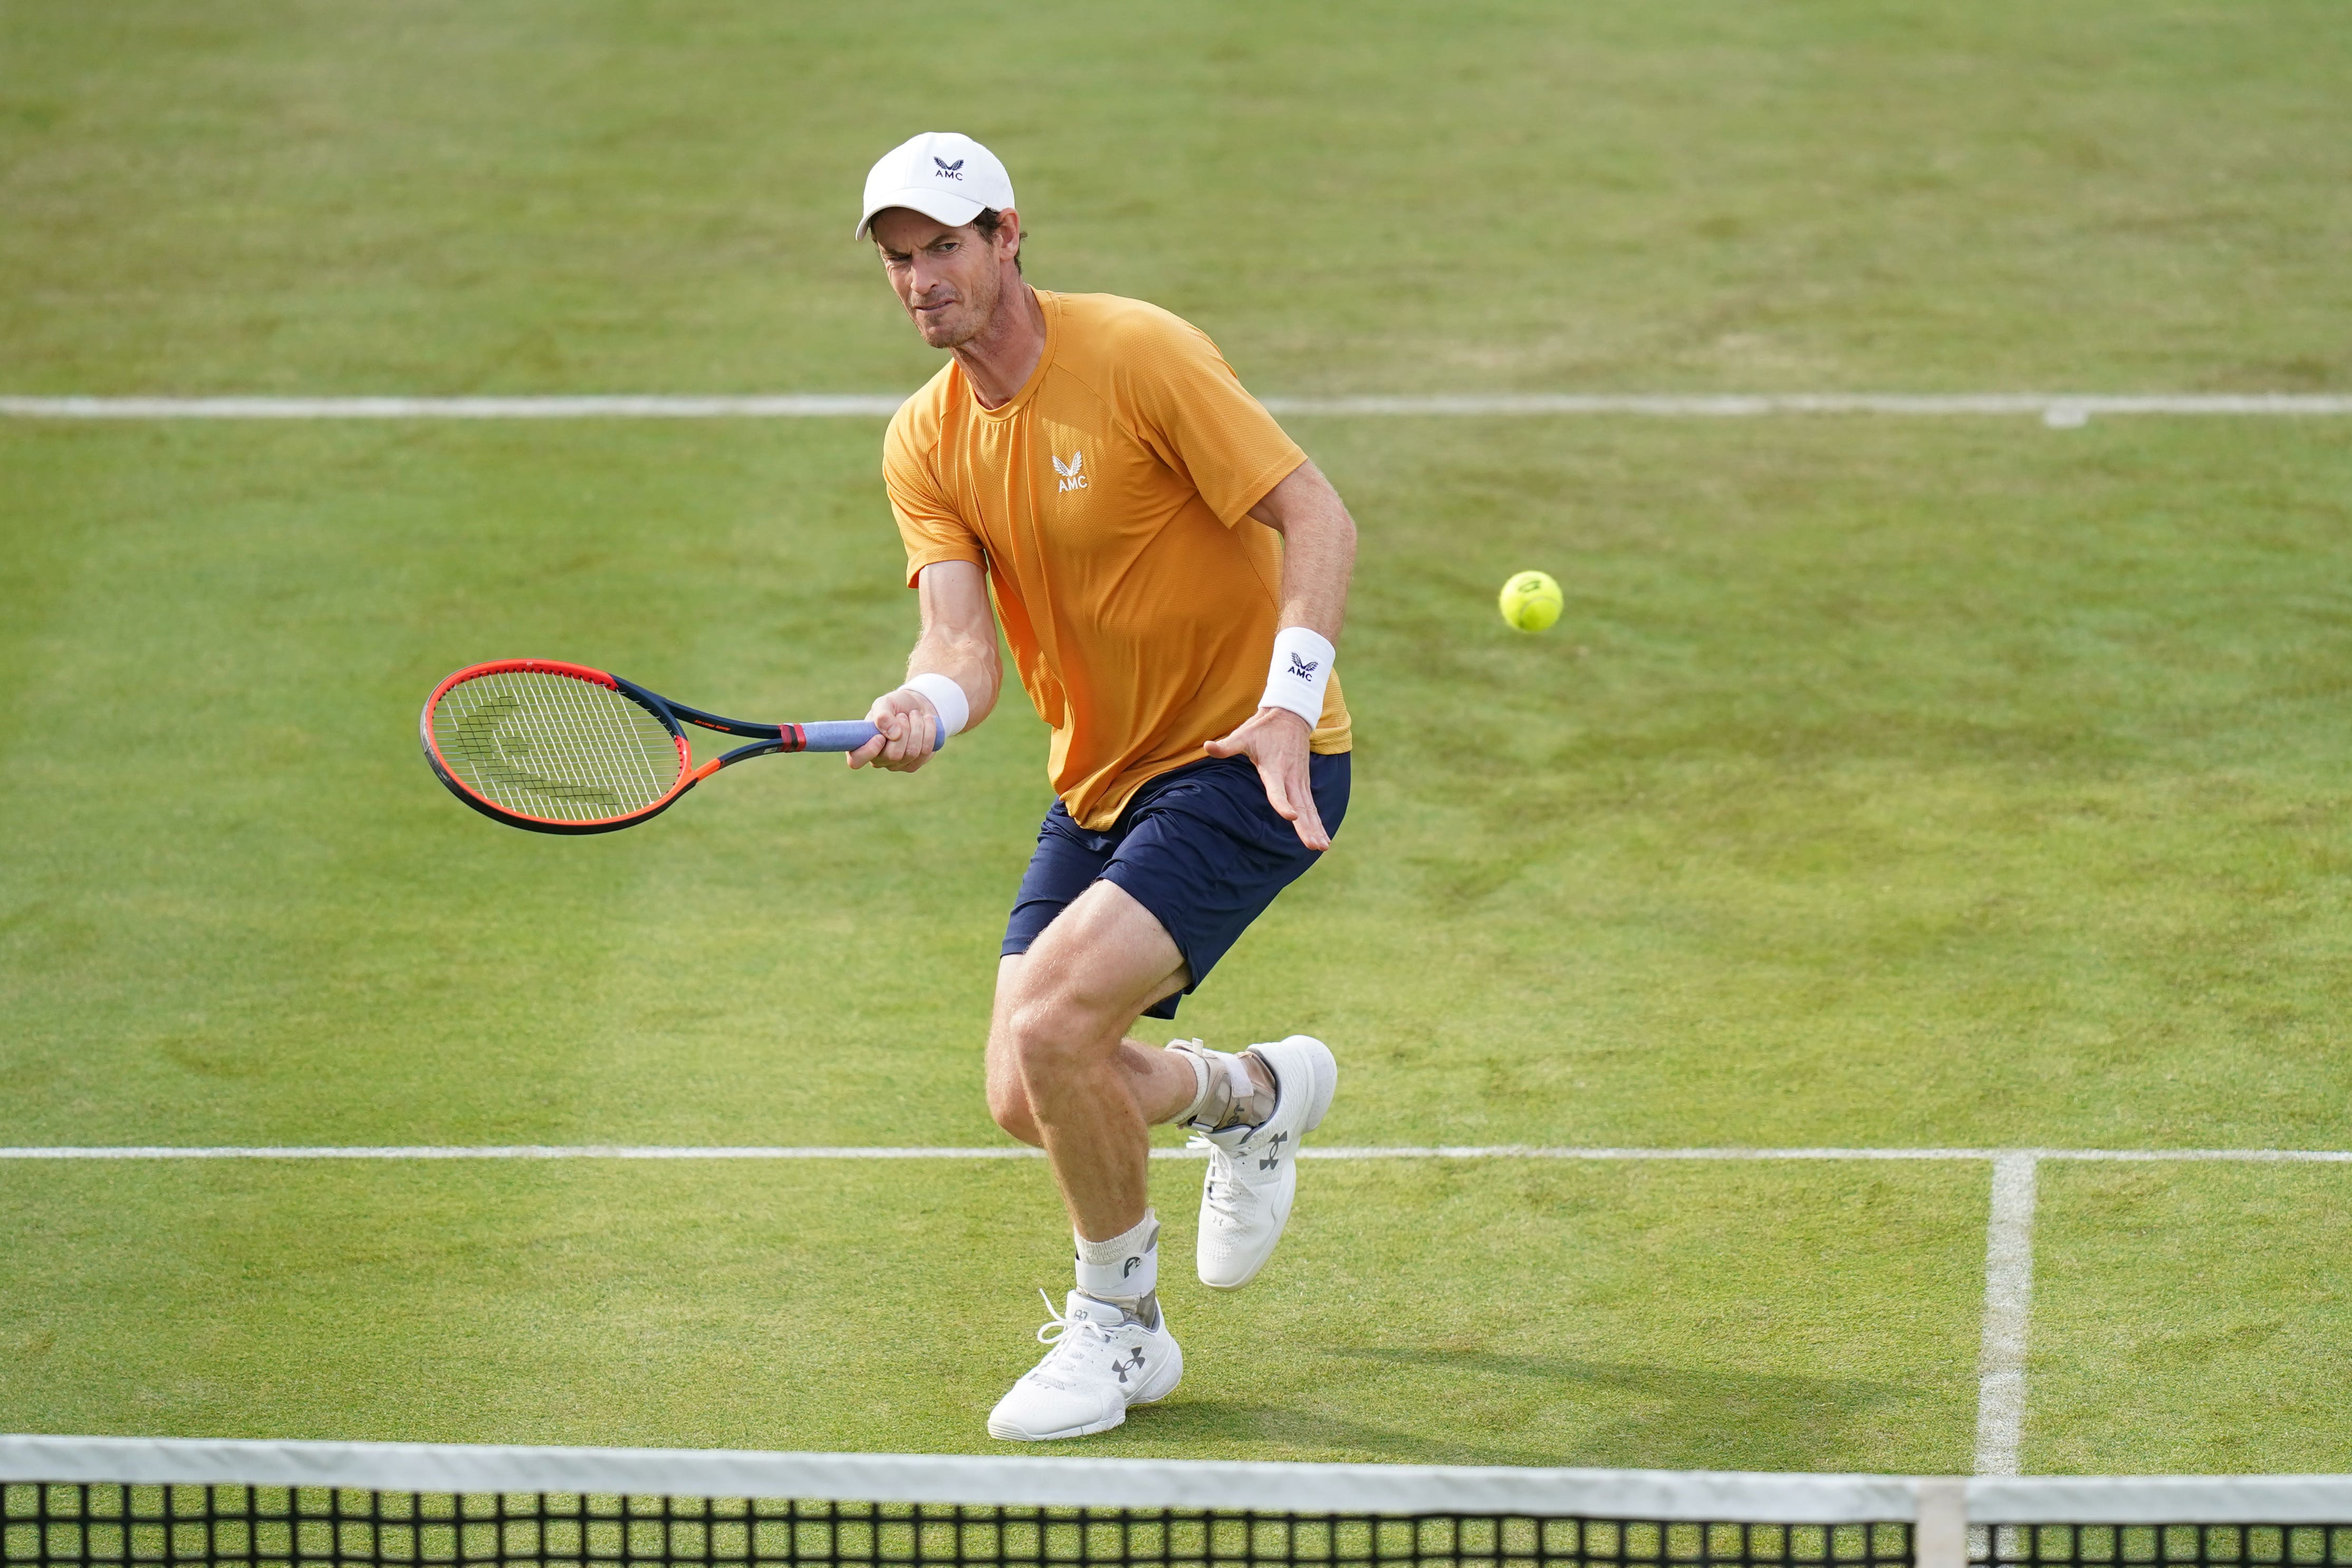 Andy Murray suffered an early loss at Queen’s Club (Adam Davy/PA)